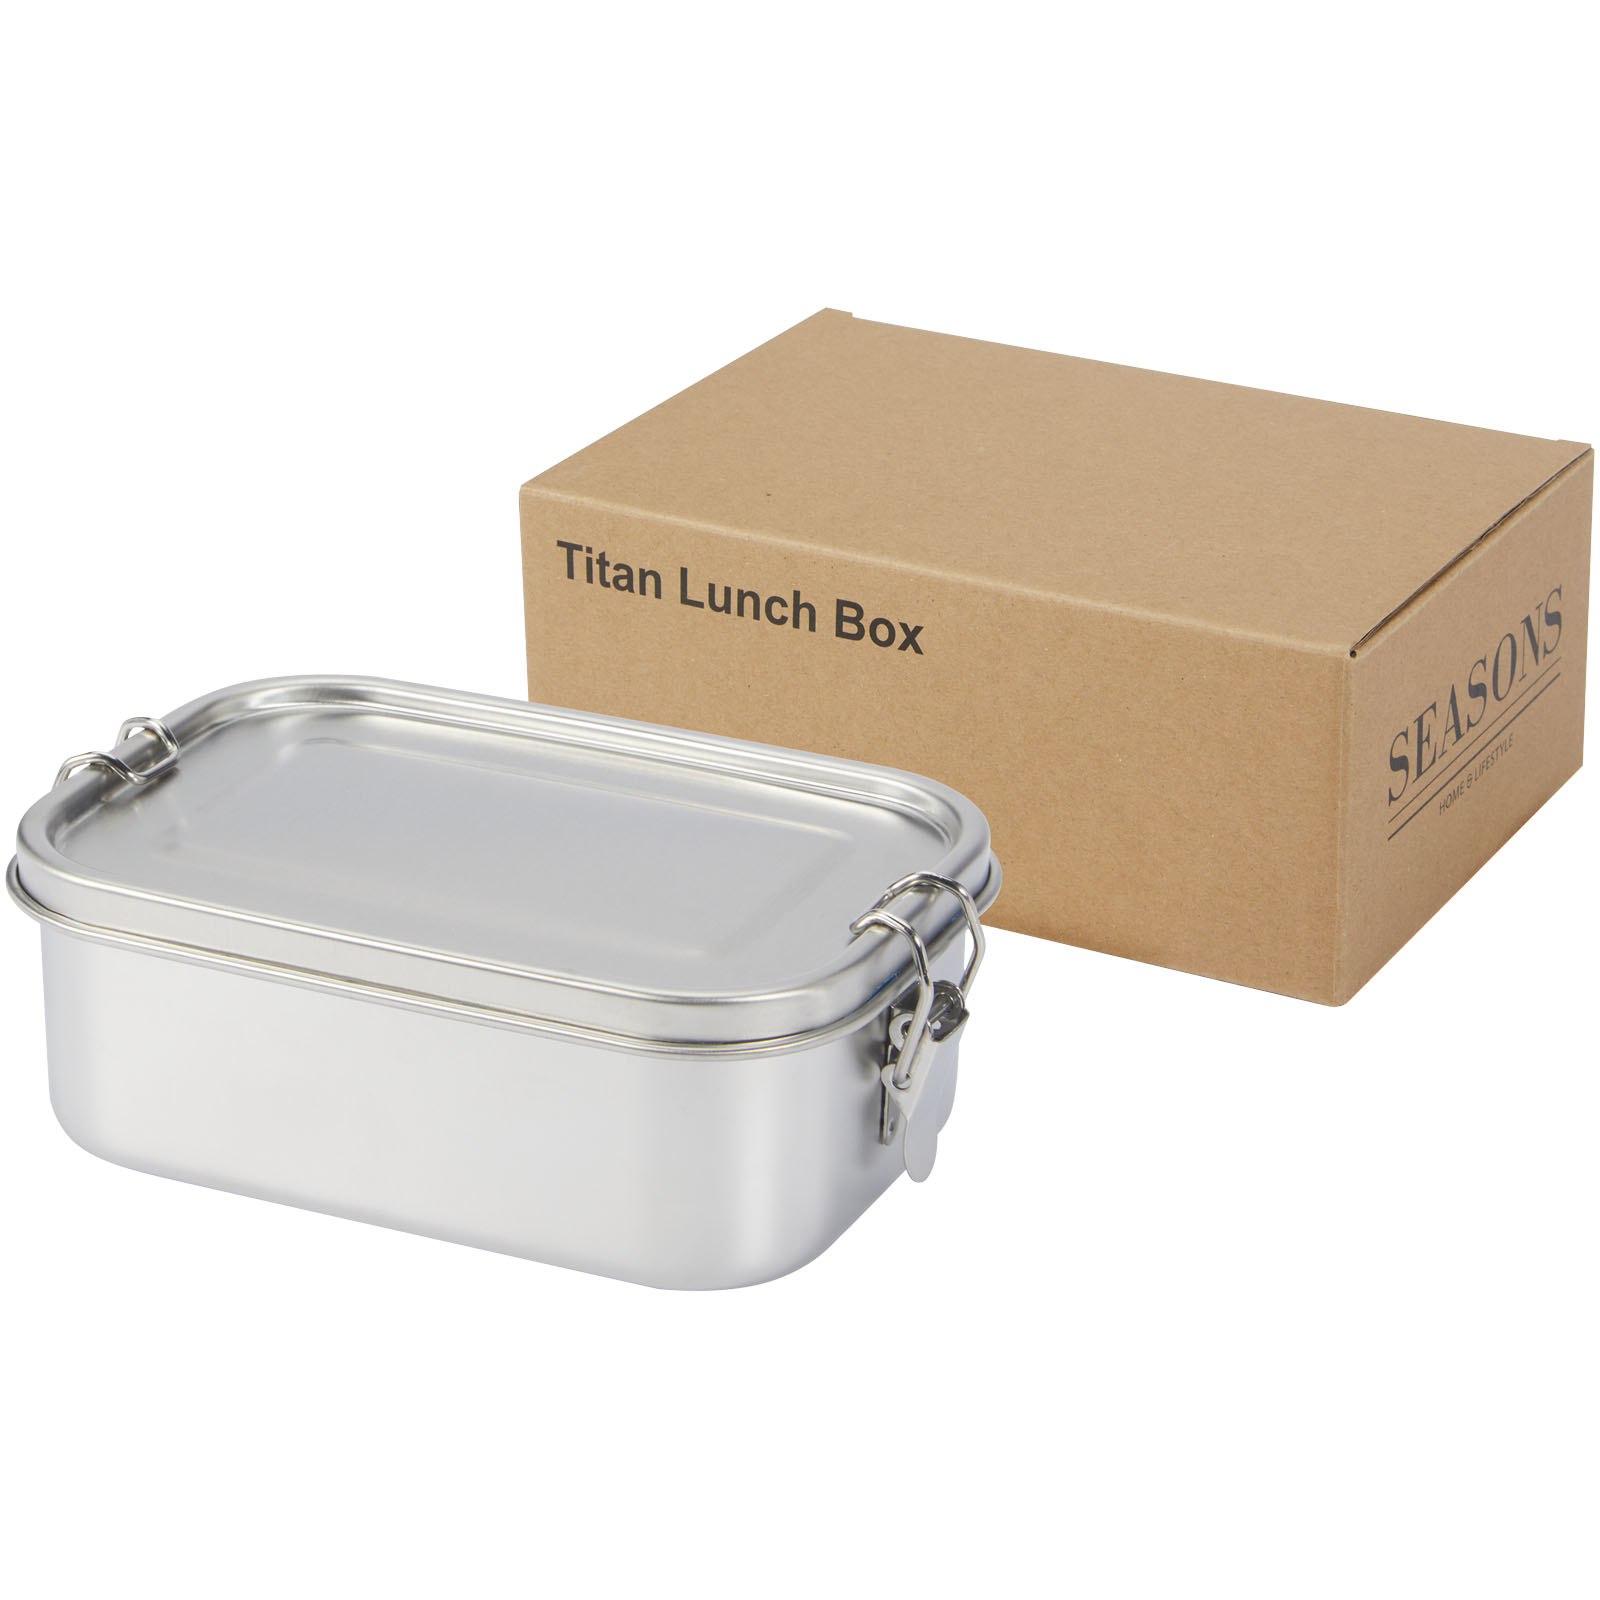 Advertising Lunch Boxes - Titan recycled stainless steel lunch box - 0